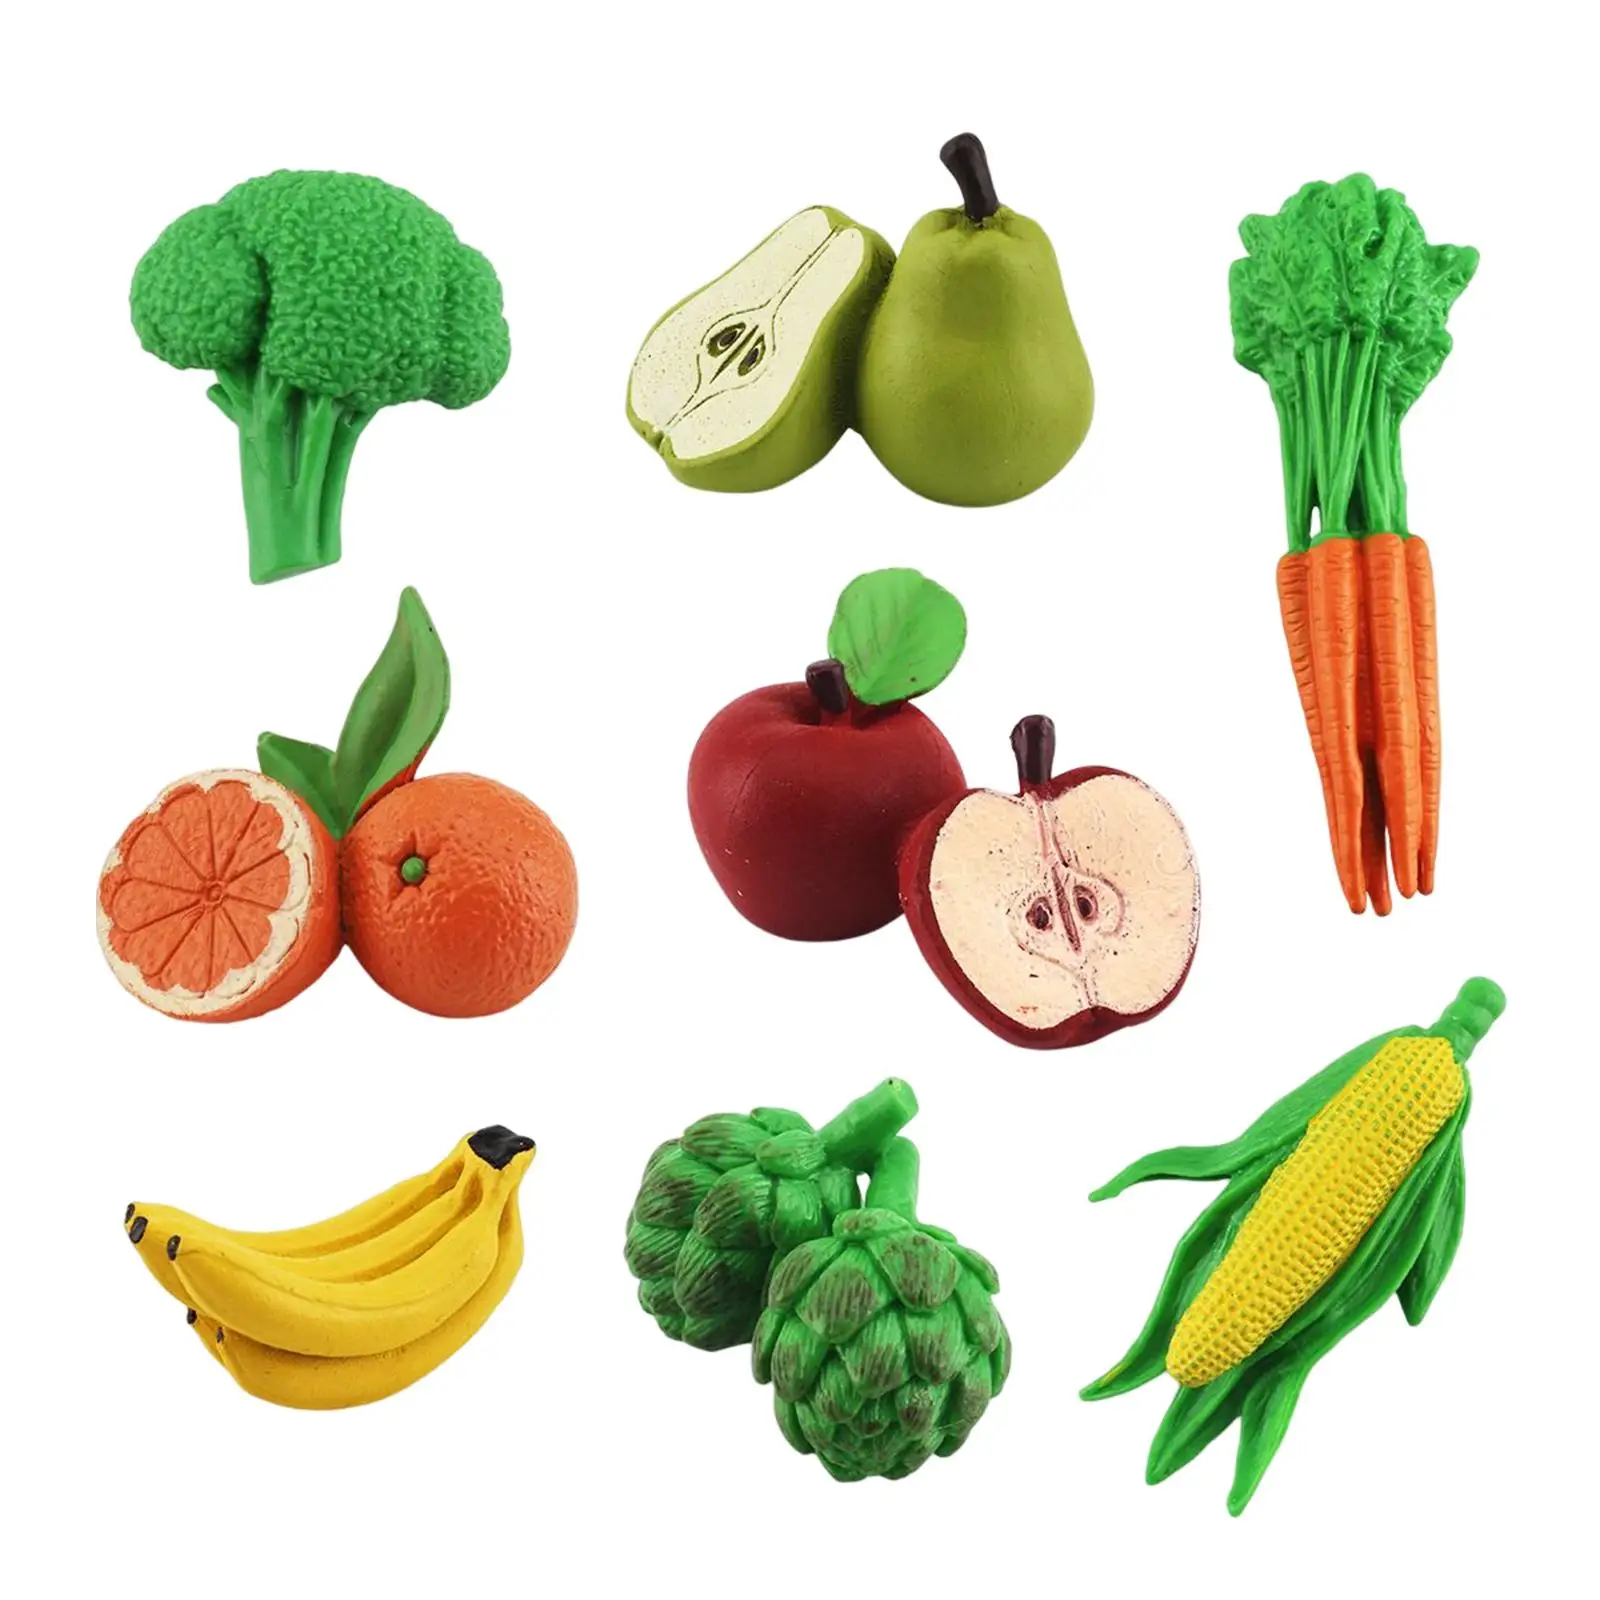 Simulation Vegetables Fruits Decoration Photography Props Crafts for Party Home Living Room Decoration Ornament